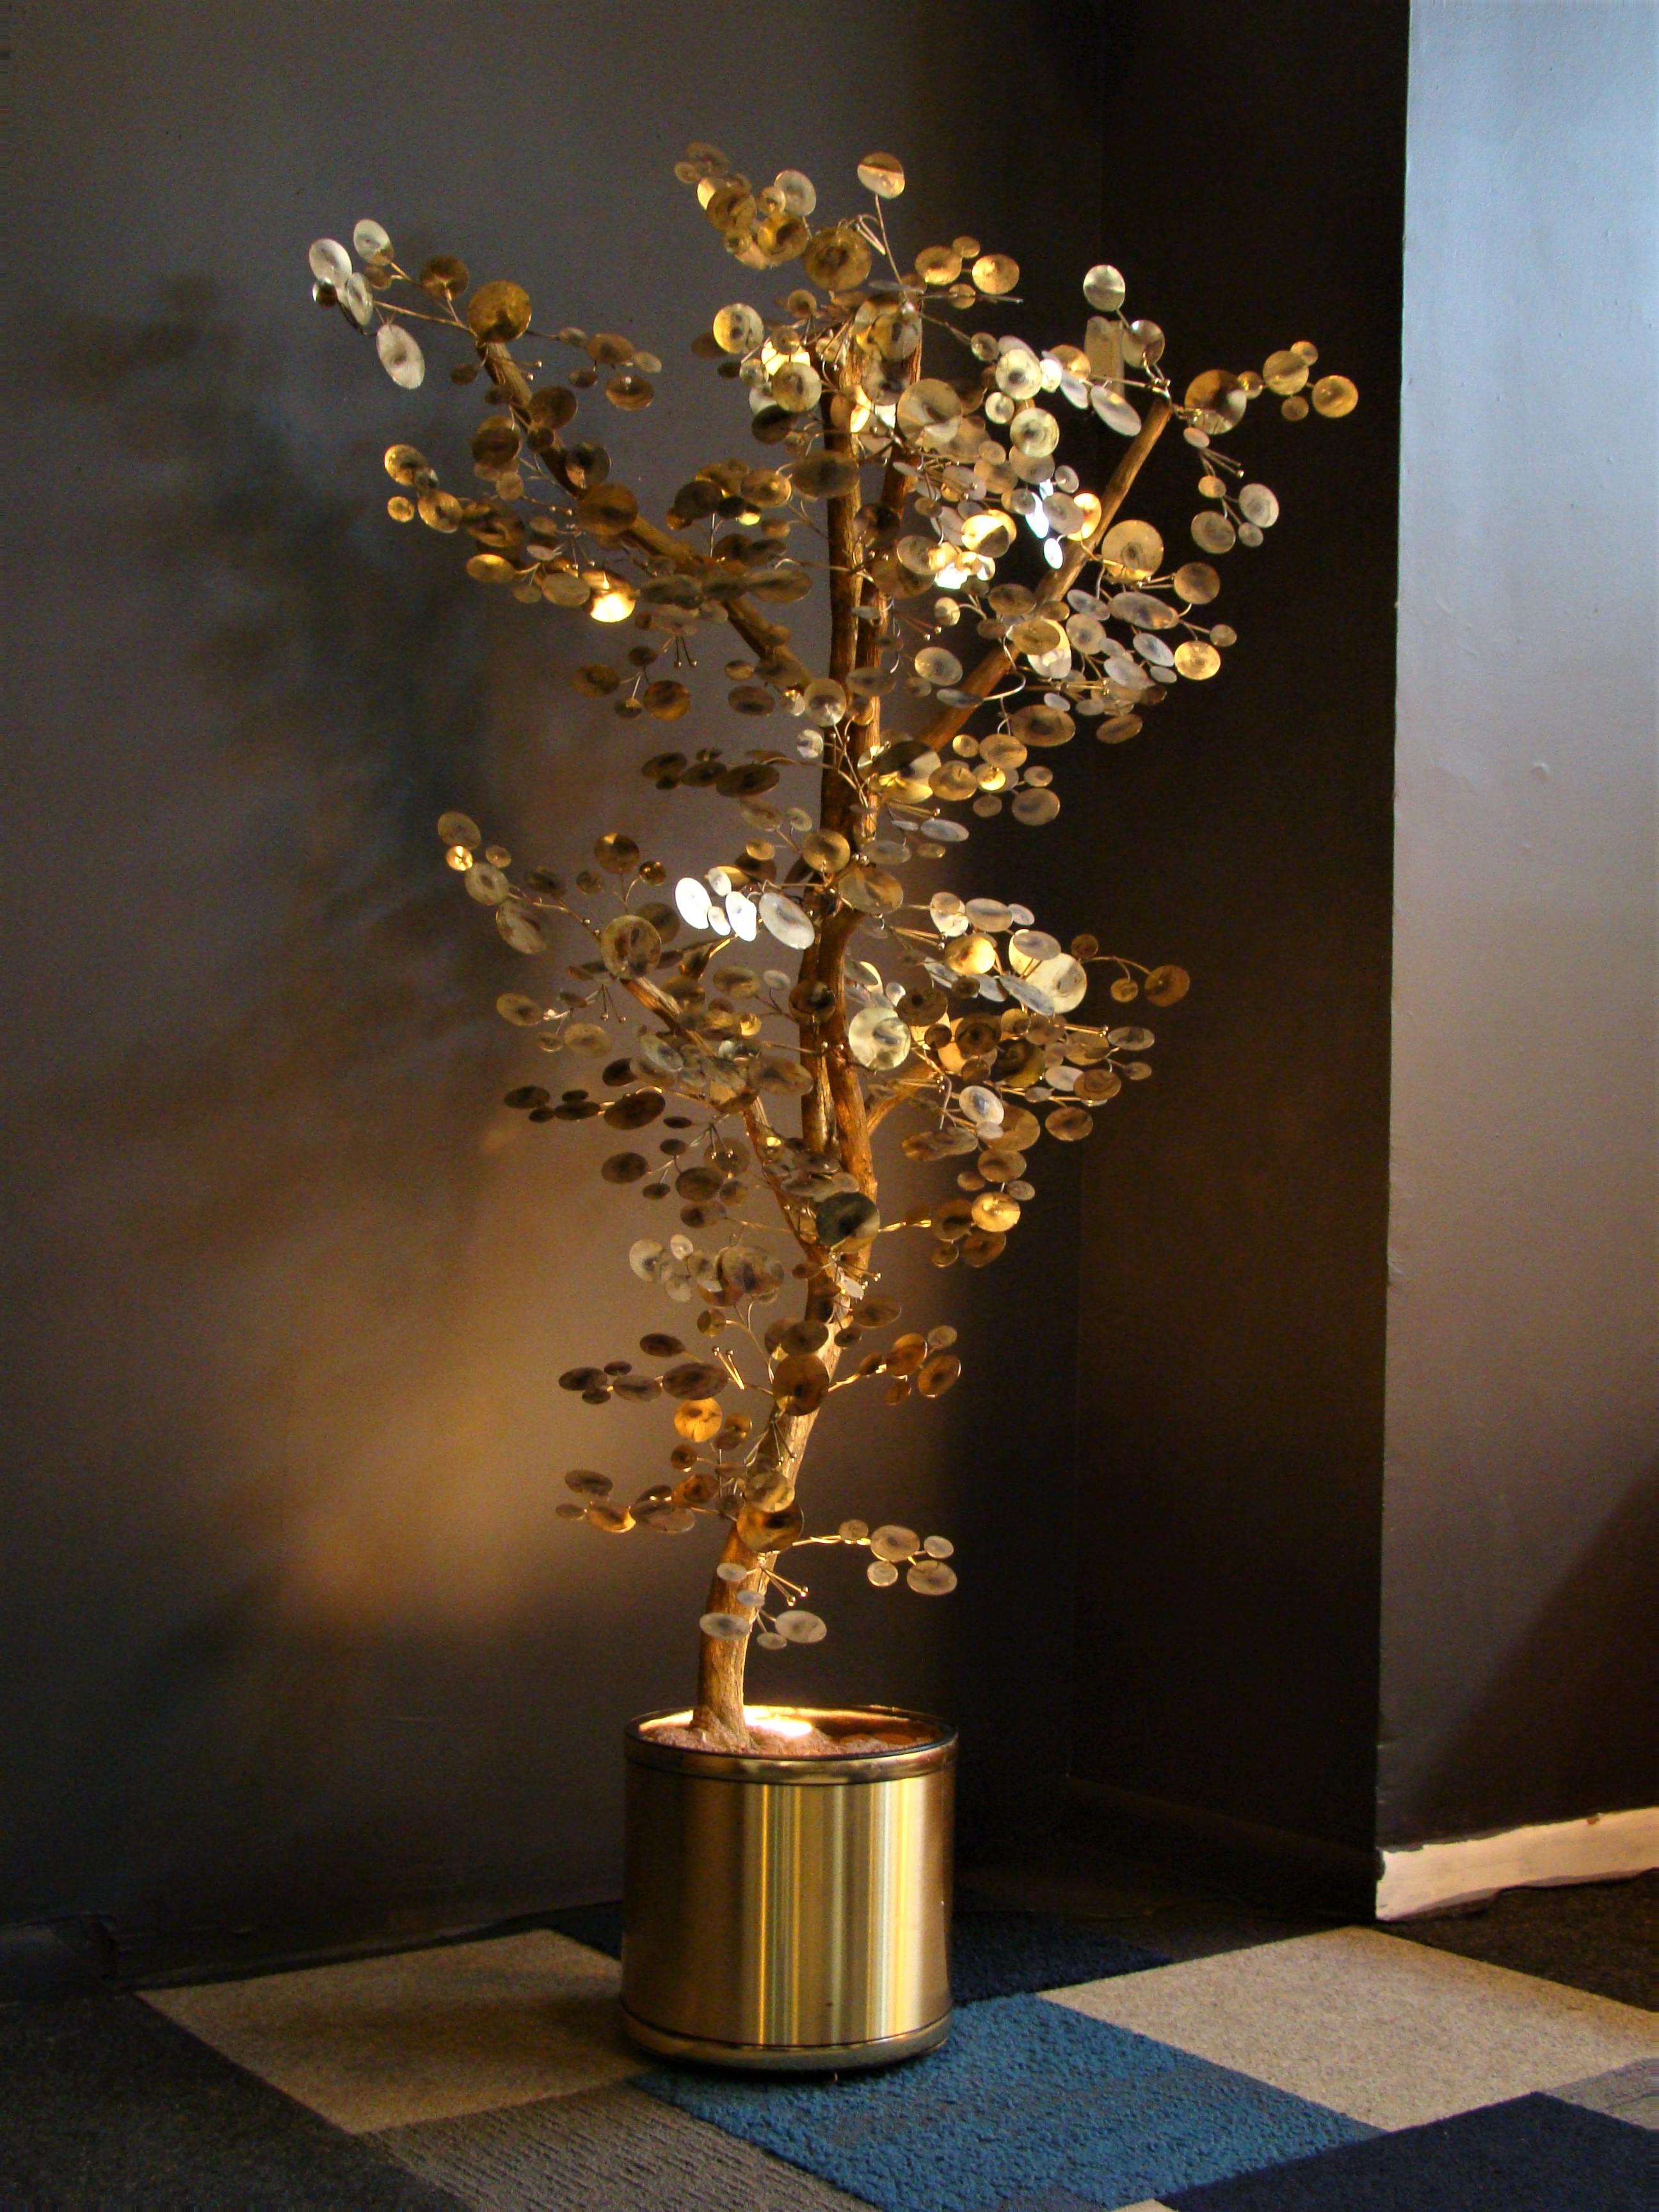 A substantial tree sculpture from the late 1960s, constructed from a natural tree branch embellished with gold patinated metal leaves, the sculpture is part of the 